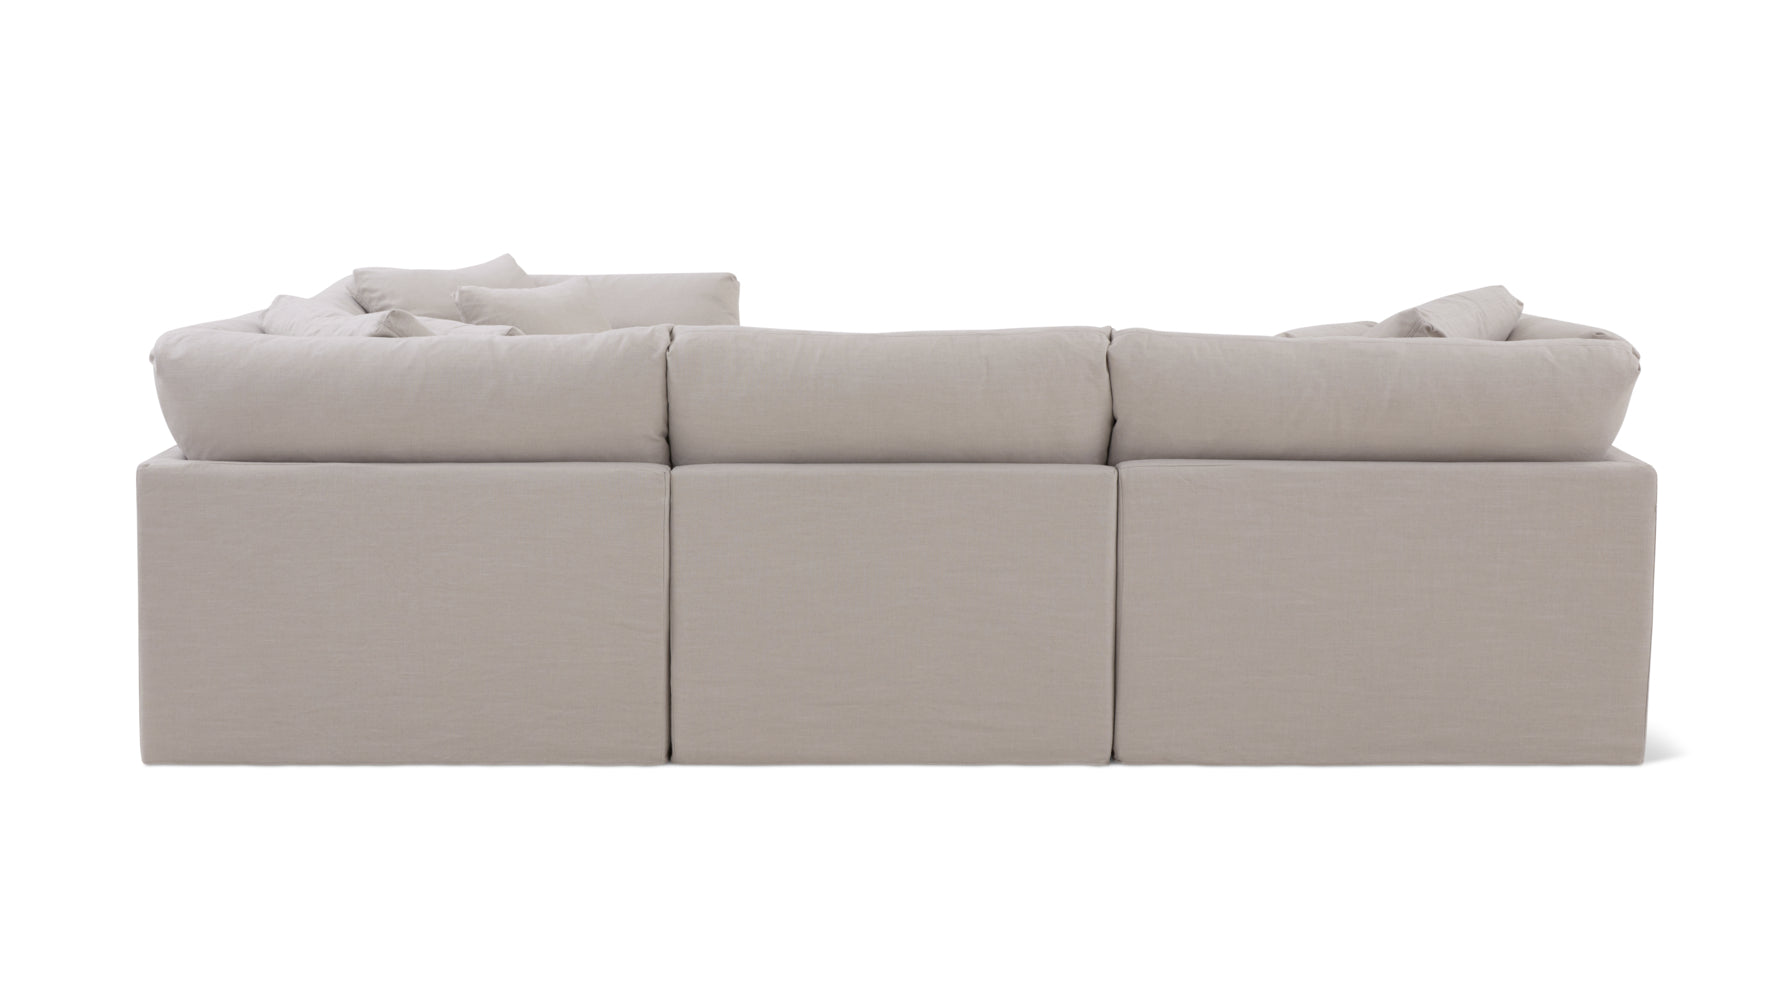 Get Together™ 4-Piece Modular Sectional Closed, Large, Clay - Image 7